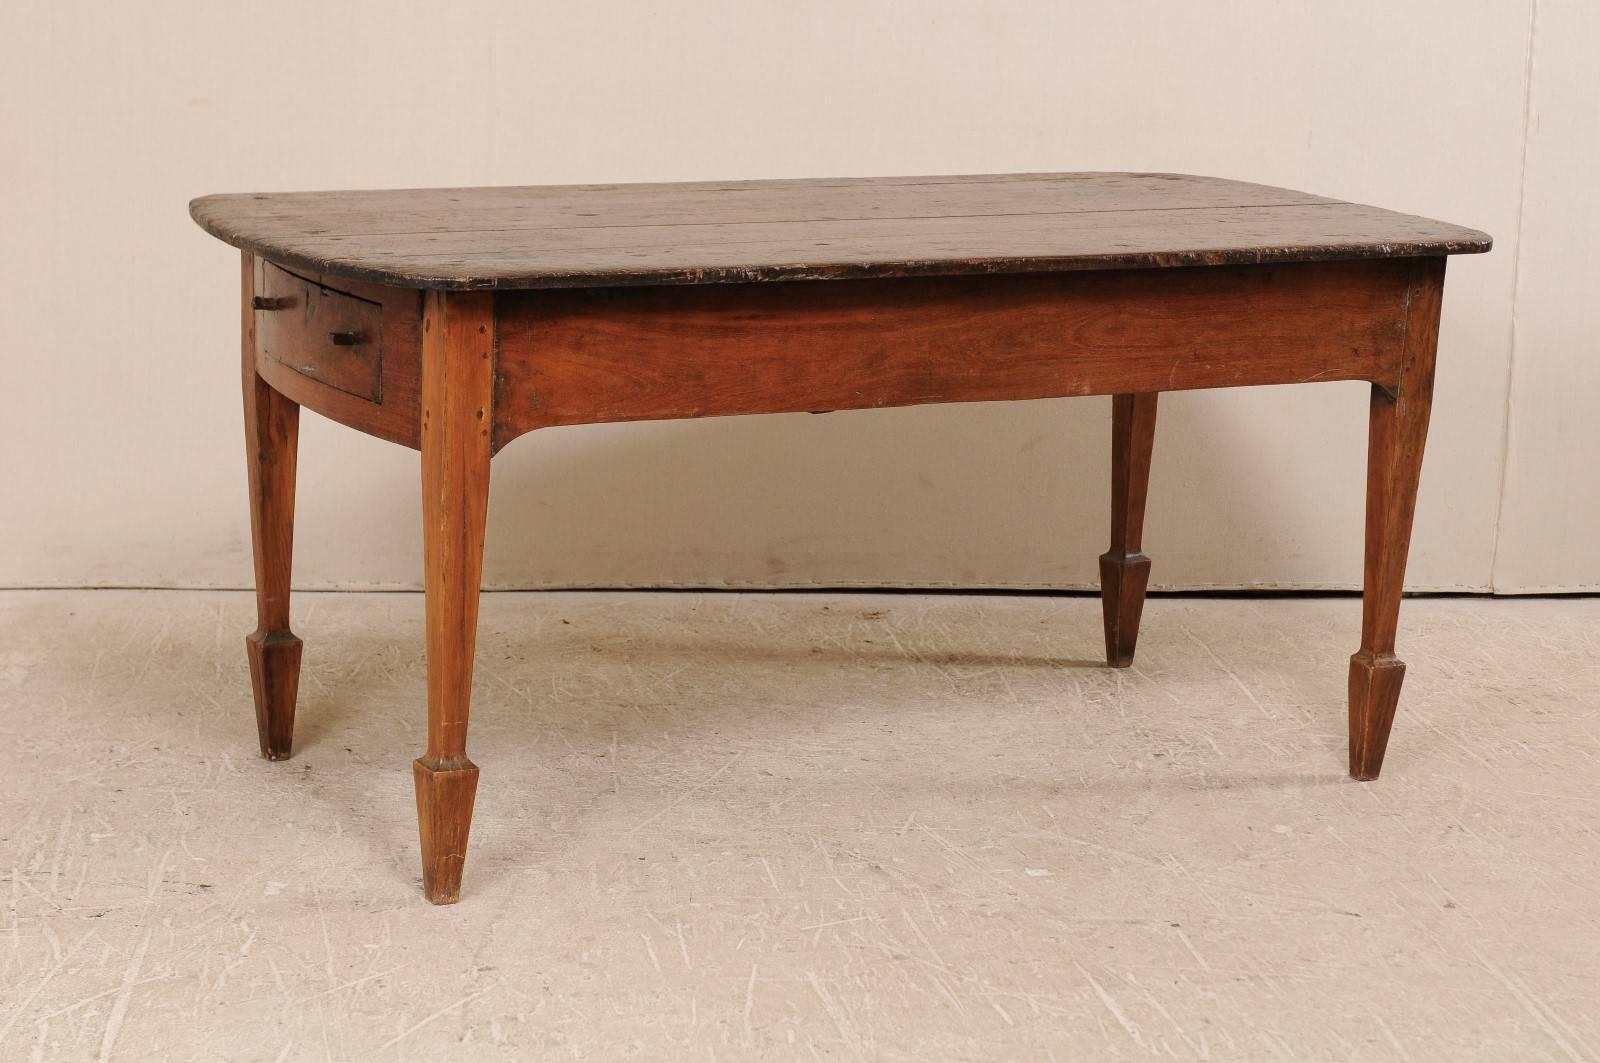 An antique Brazilian table. This Brazilian table, from the early 20th century, features two drawers (one at each far side) and is raised up on squared legs with spaded feet. The table is peroba wood (a tropical native hardwood, 35% harder than oak),